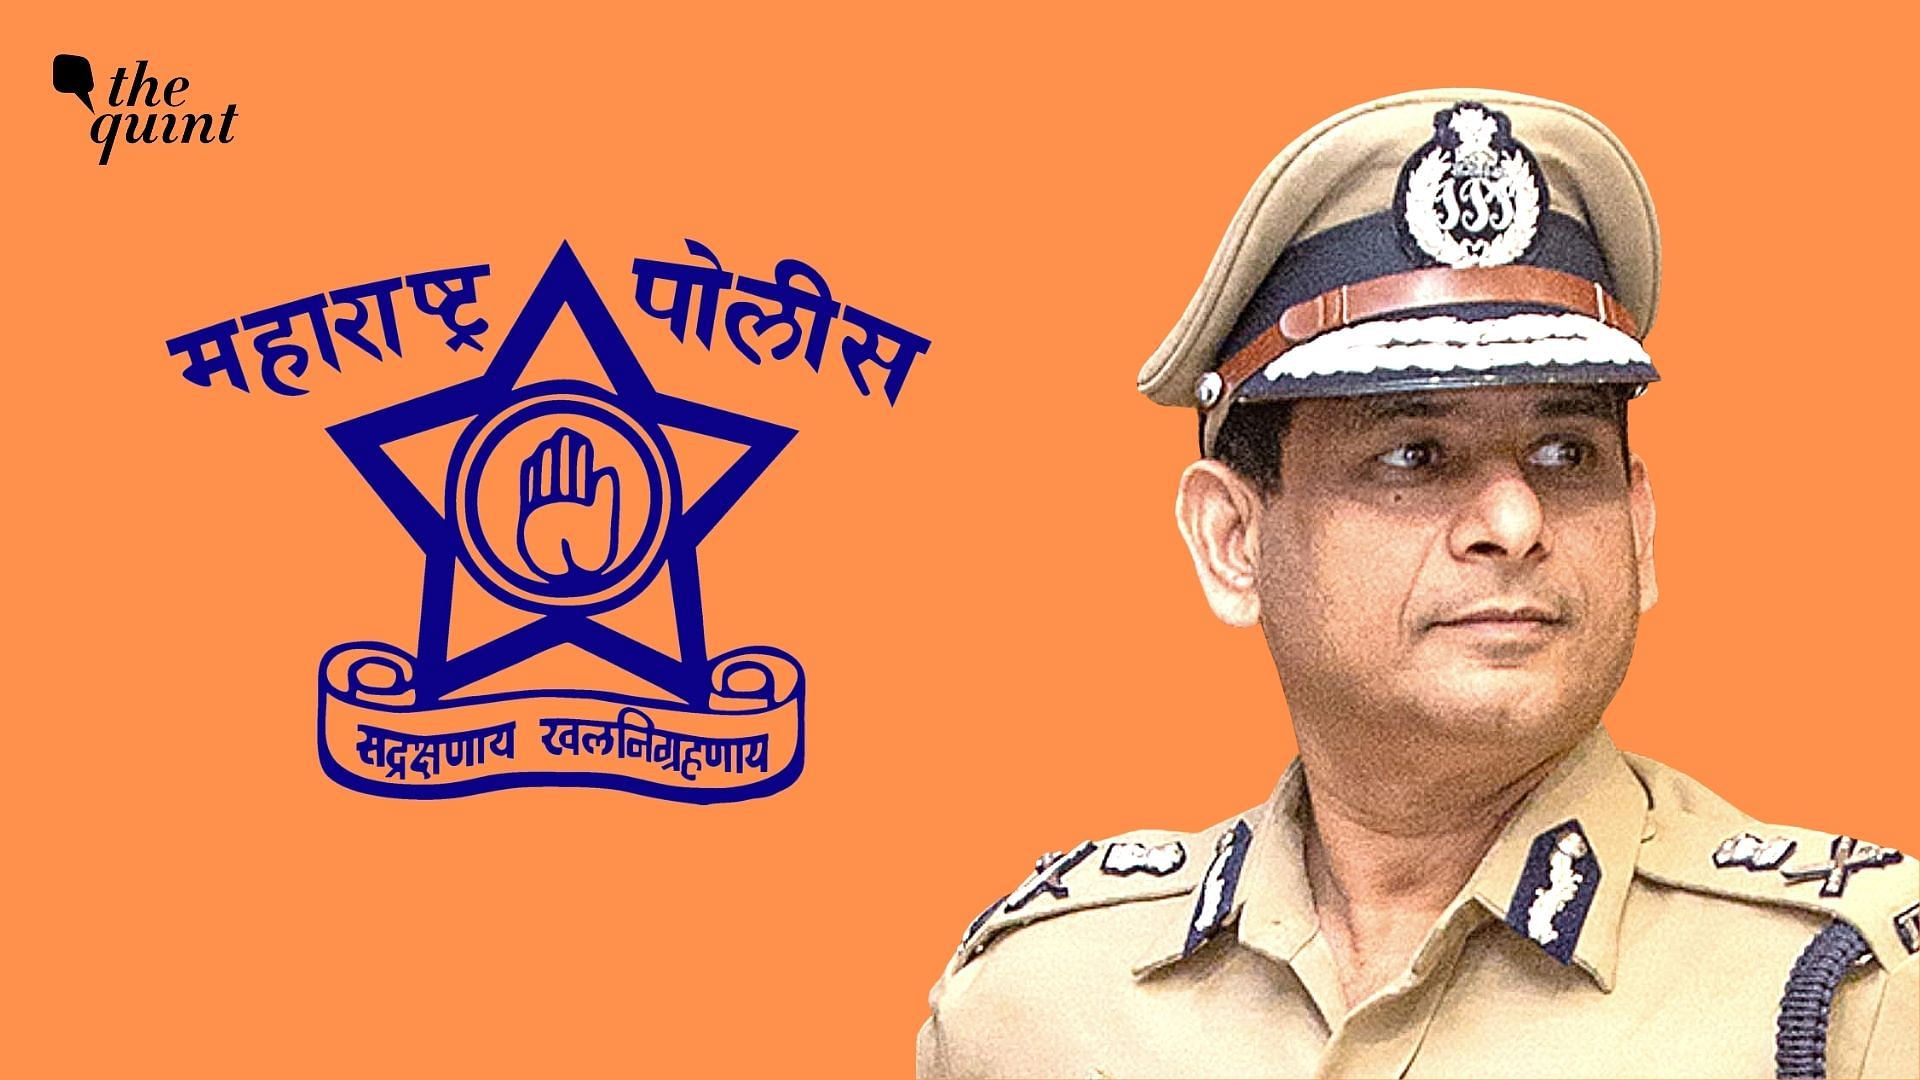  Hemant Nagrale has taken over as the new Commissioner of Mumbai Police after Param Bir Singh’s transfer on Wednesday, 17 March.